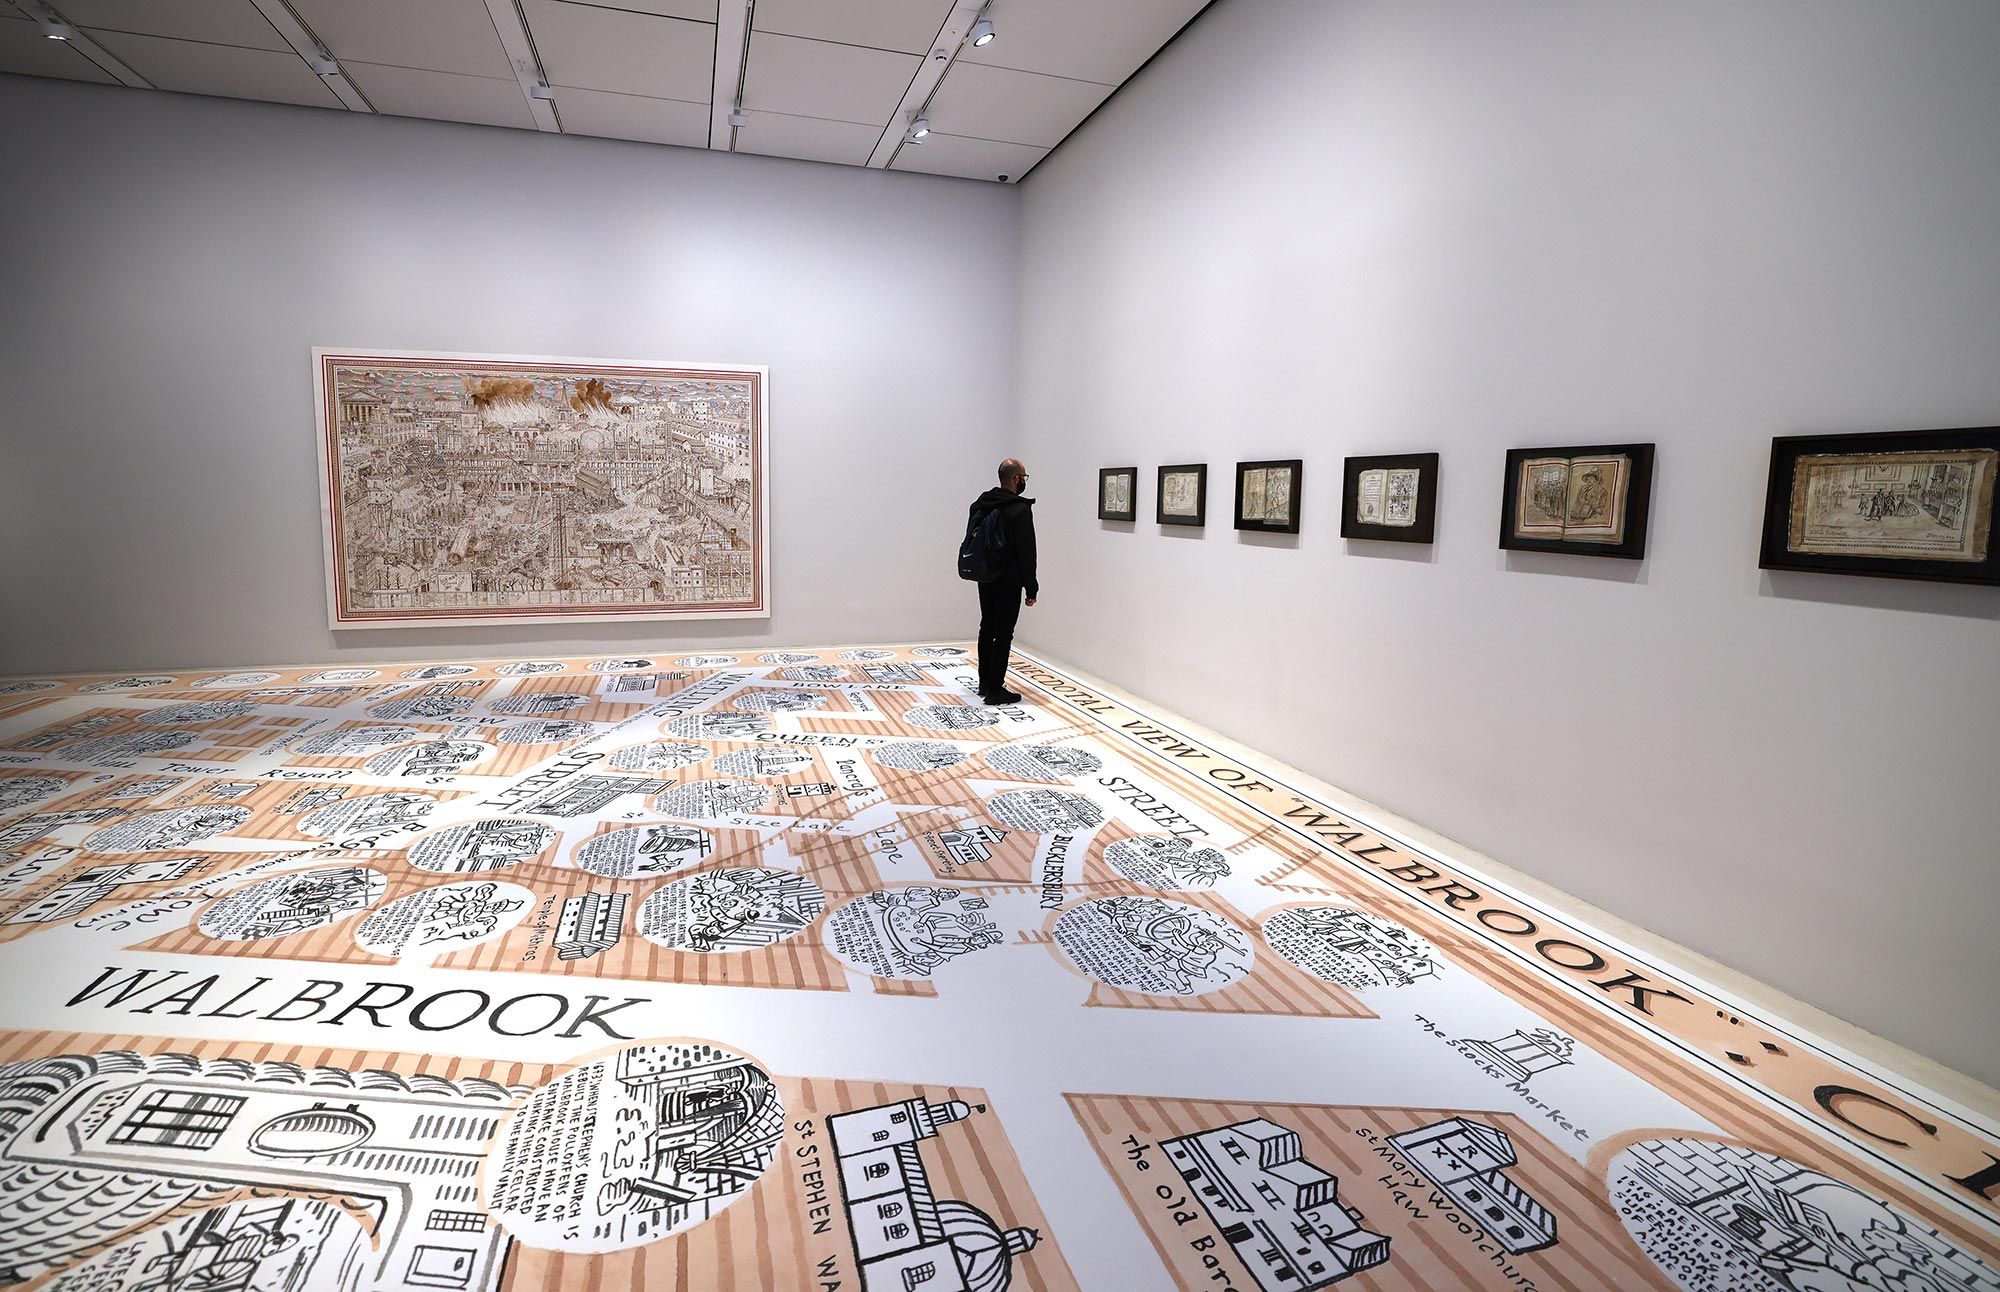 An guest of Bloomberg SPACE at London Mithraeum looks at a smaller Adam Dant art piece, a part of a row of smaller art pieces at the exhibit filling a wall.